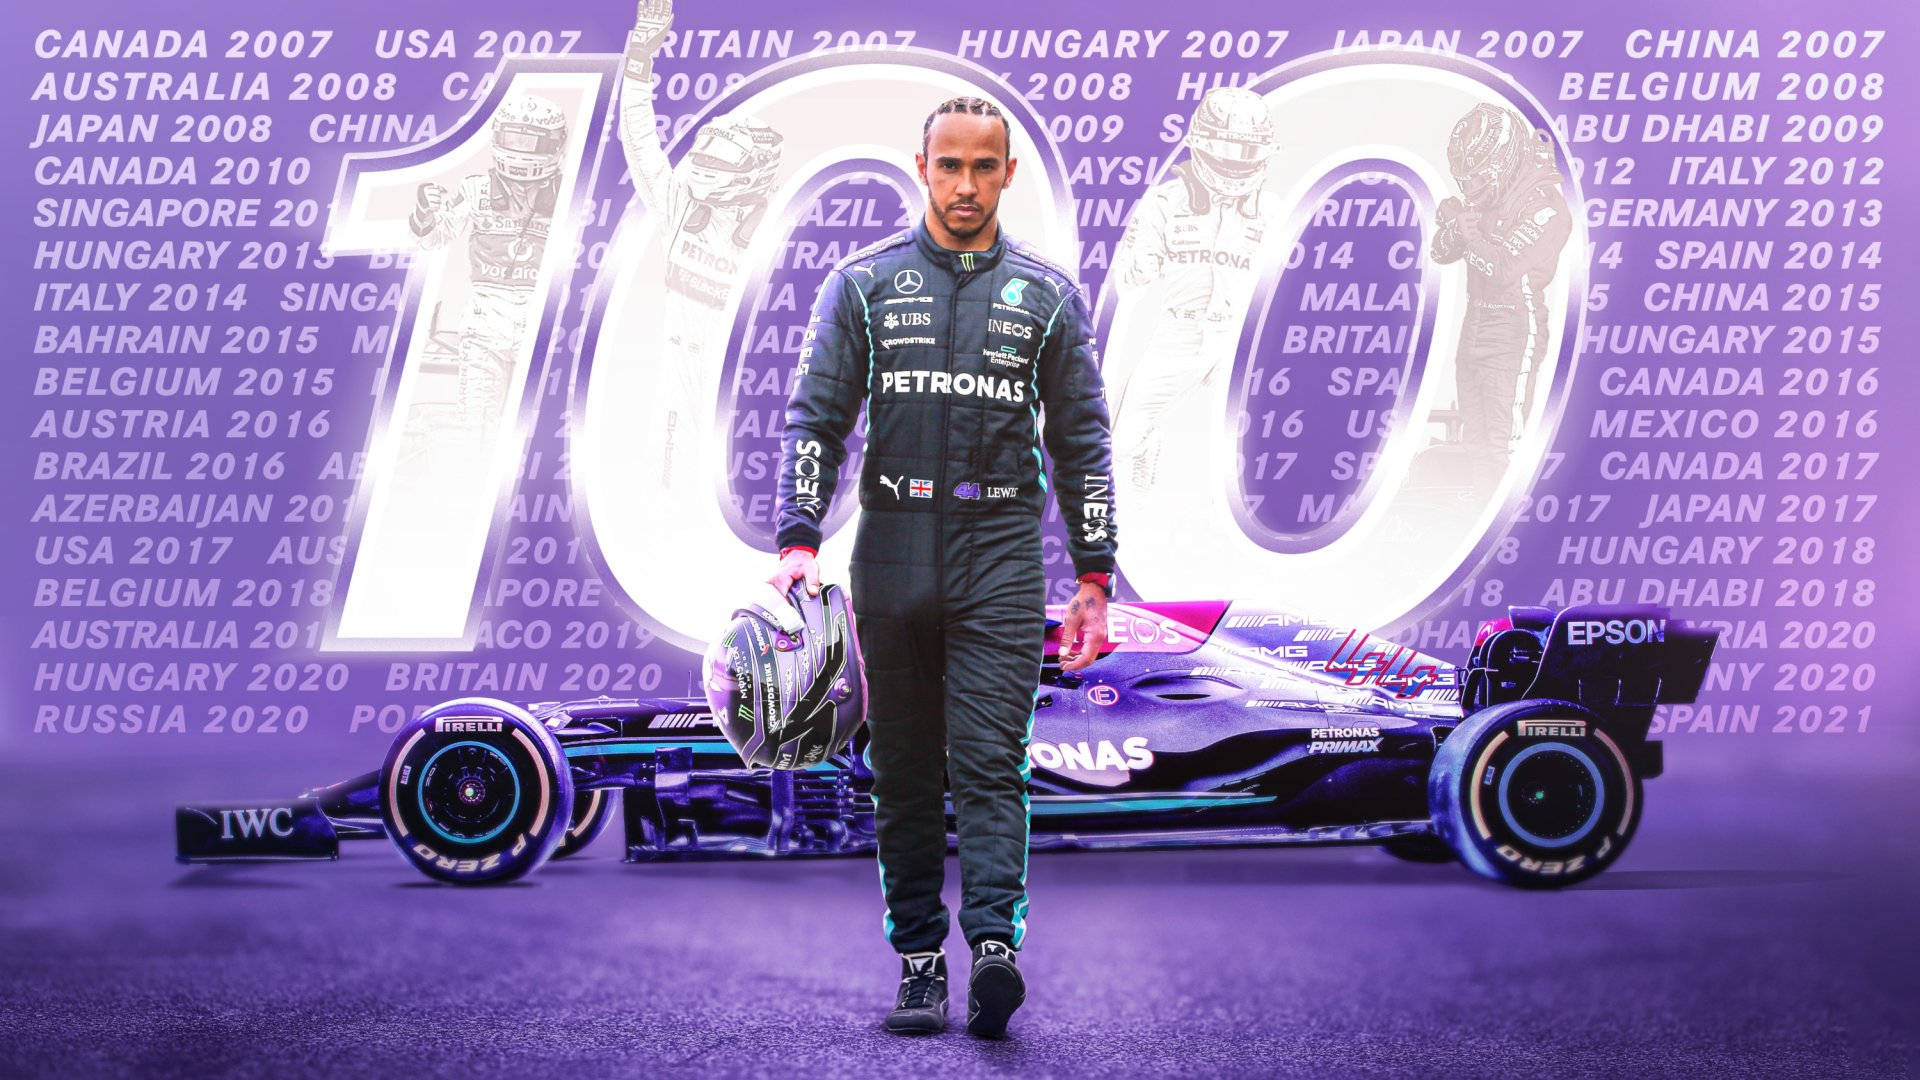 A Man Standing In Front Of A Purple Car With A Number 100 Wallpaper